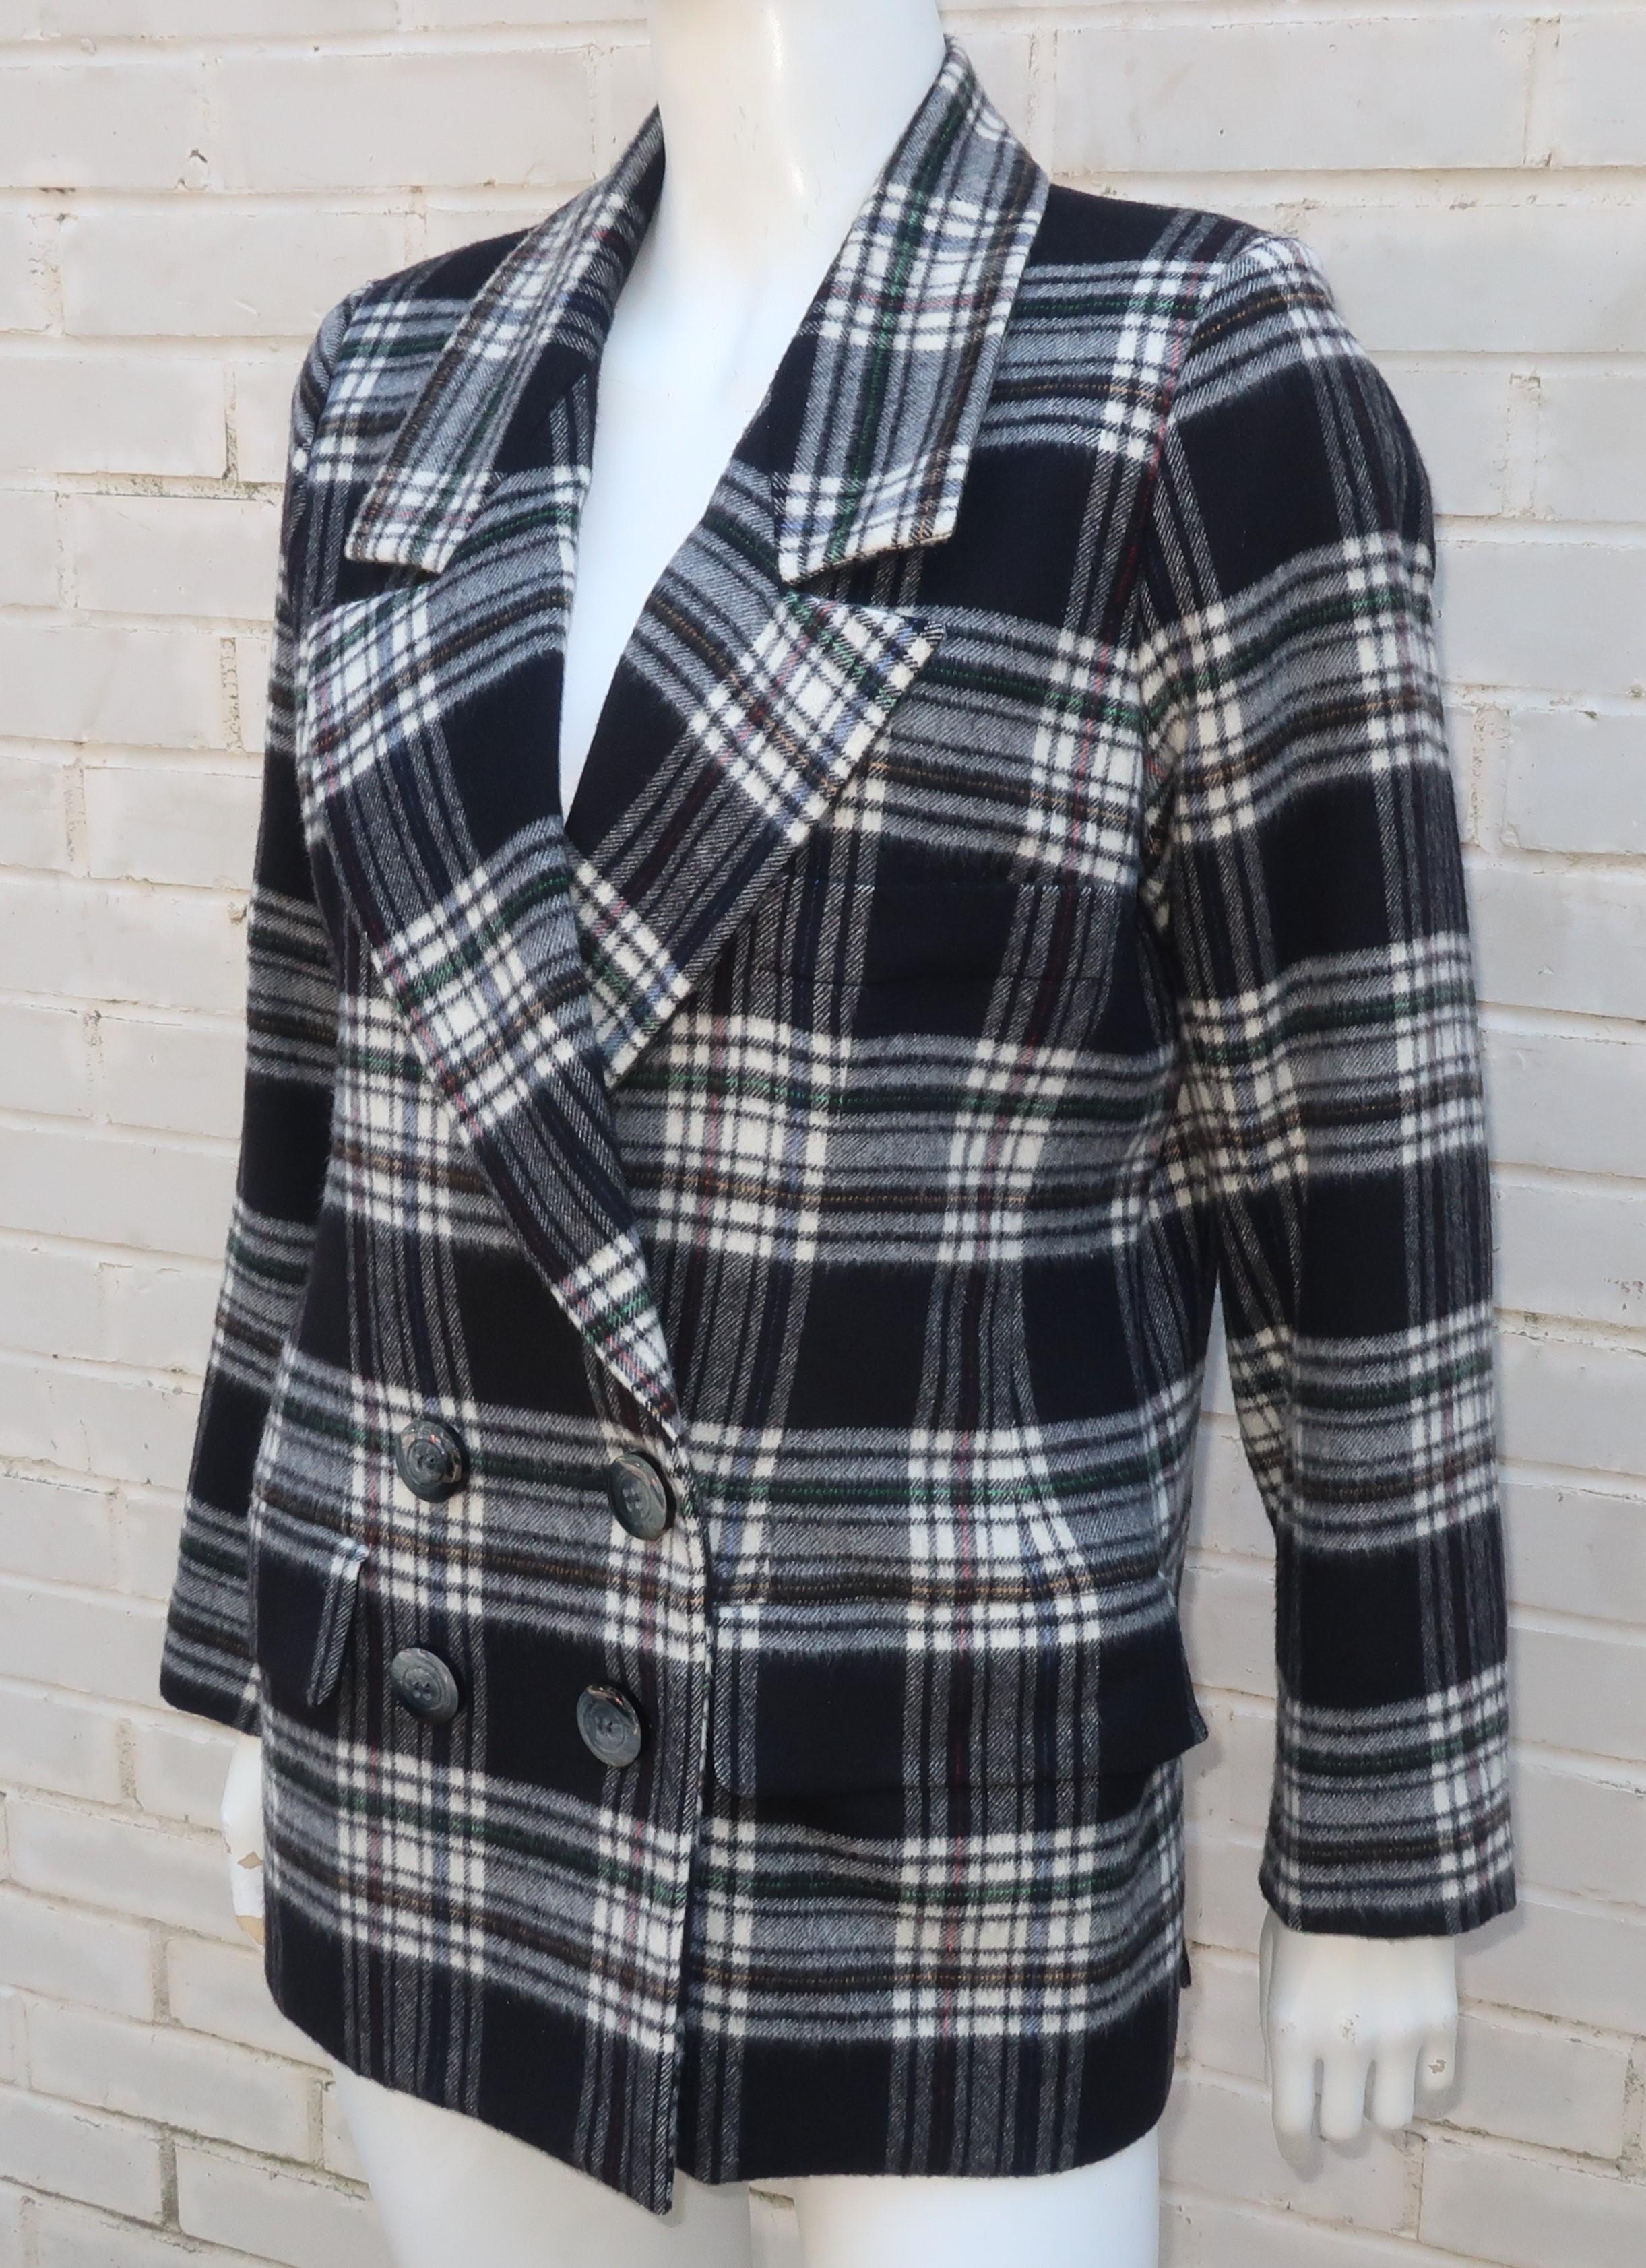 Yves Saint Laurent Rive Gauche plaid wool double breasted jacket in black & white with skinny stripes of red, blue and green.  The menswear style silhouette offers front flap pockets and a breast pocket with generous lapels.  The buttons, both at